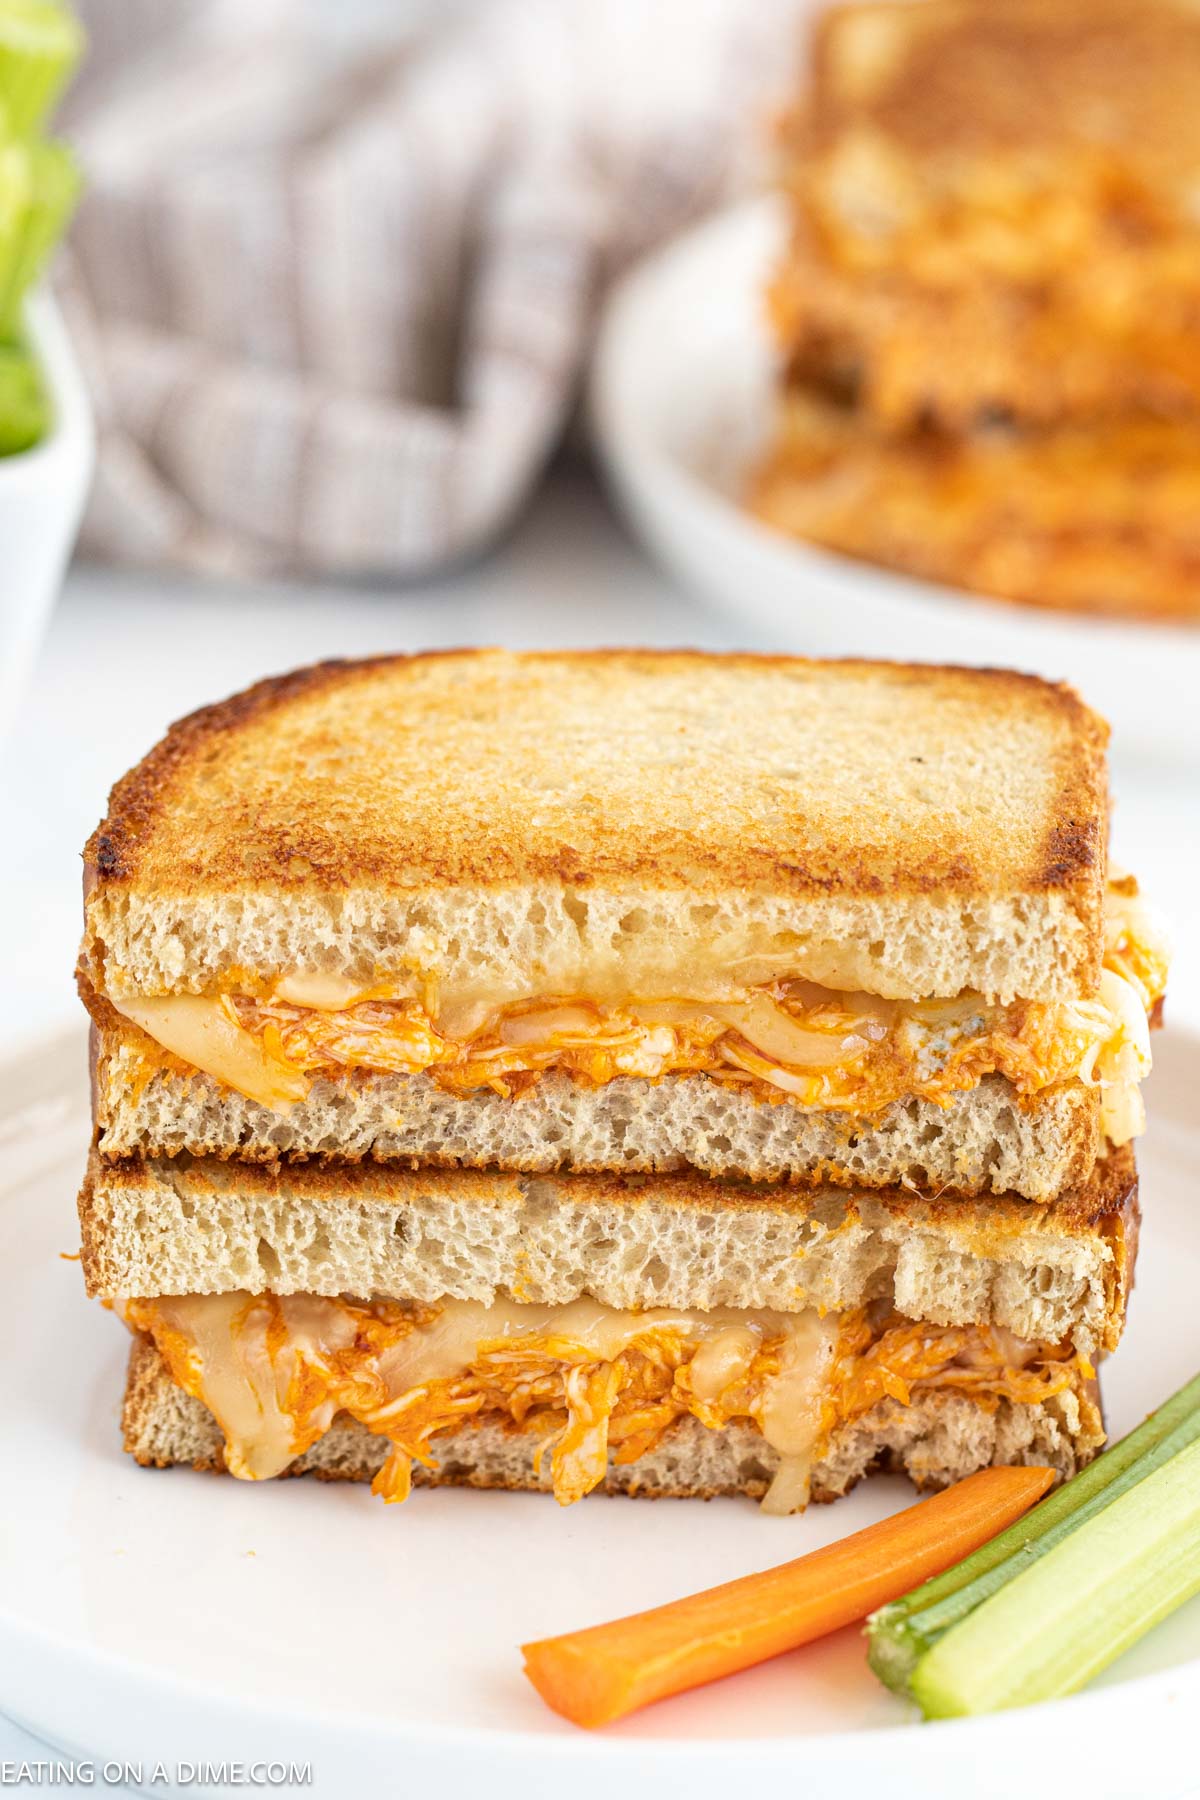 Buffalo Grilled Cheese Sandwich stacked on a plate with celery and carrots